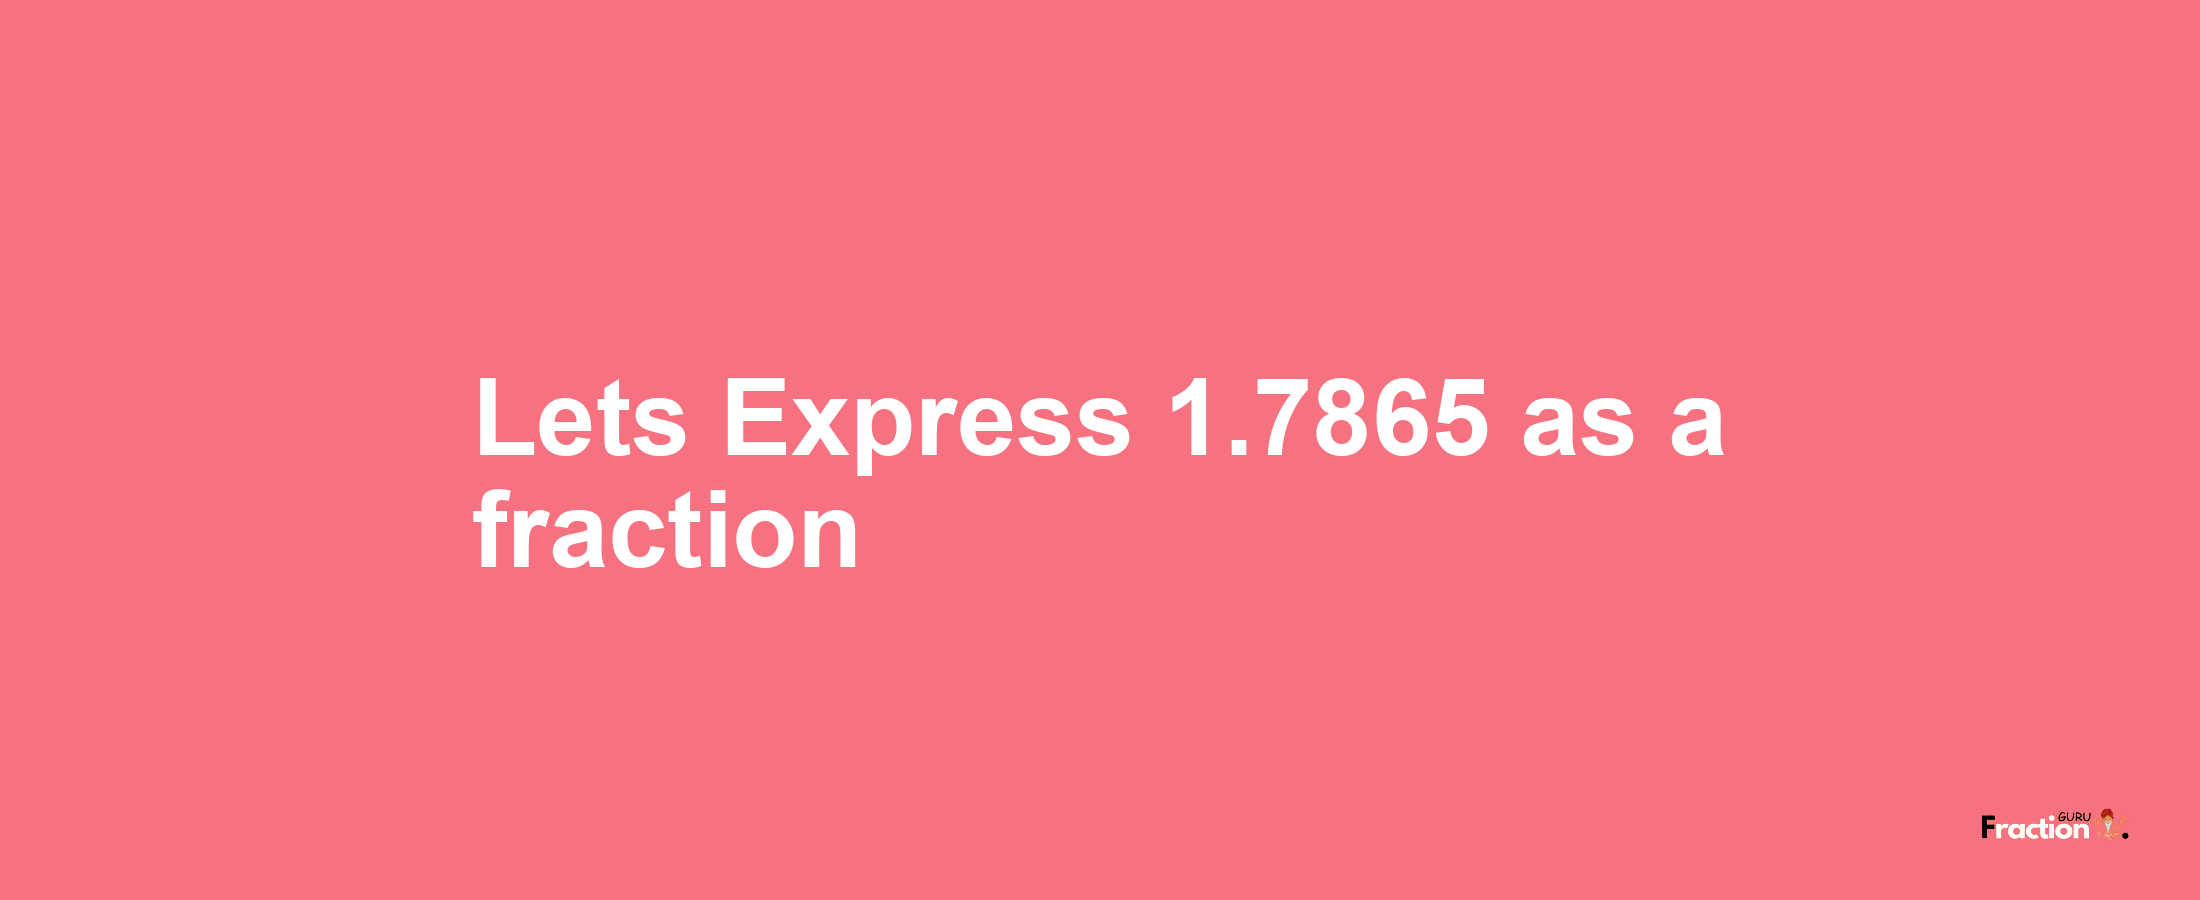 Lets Express 1.7865 as afraction